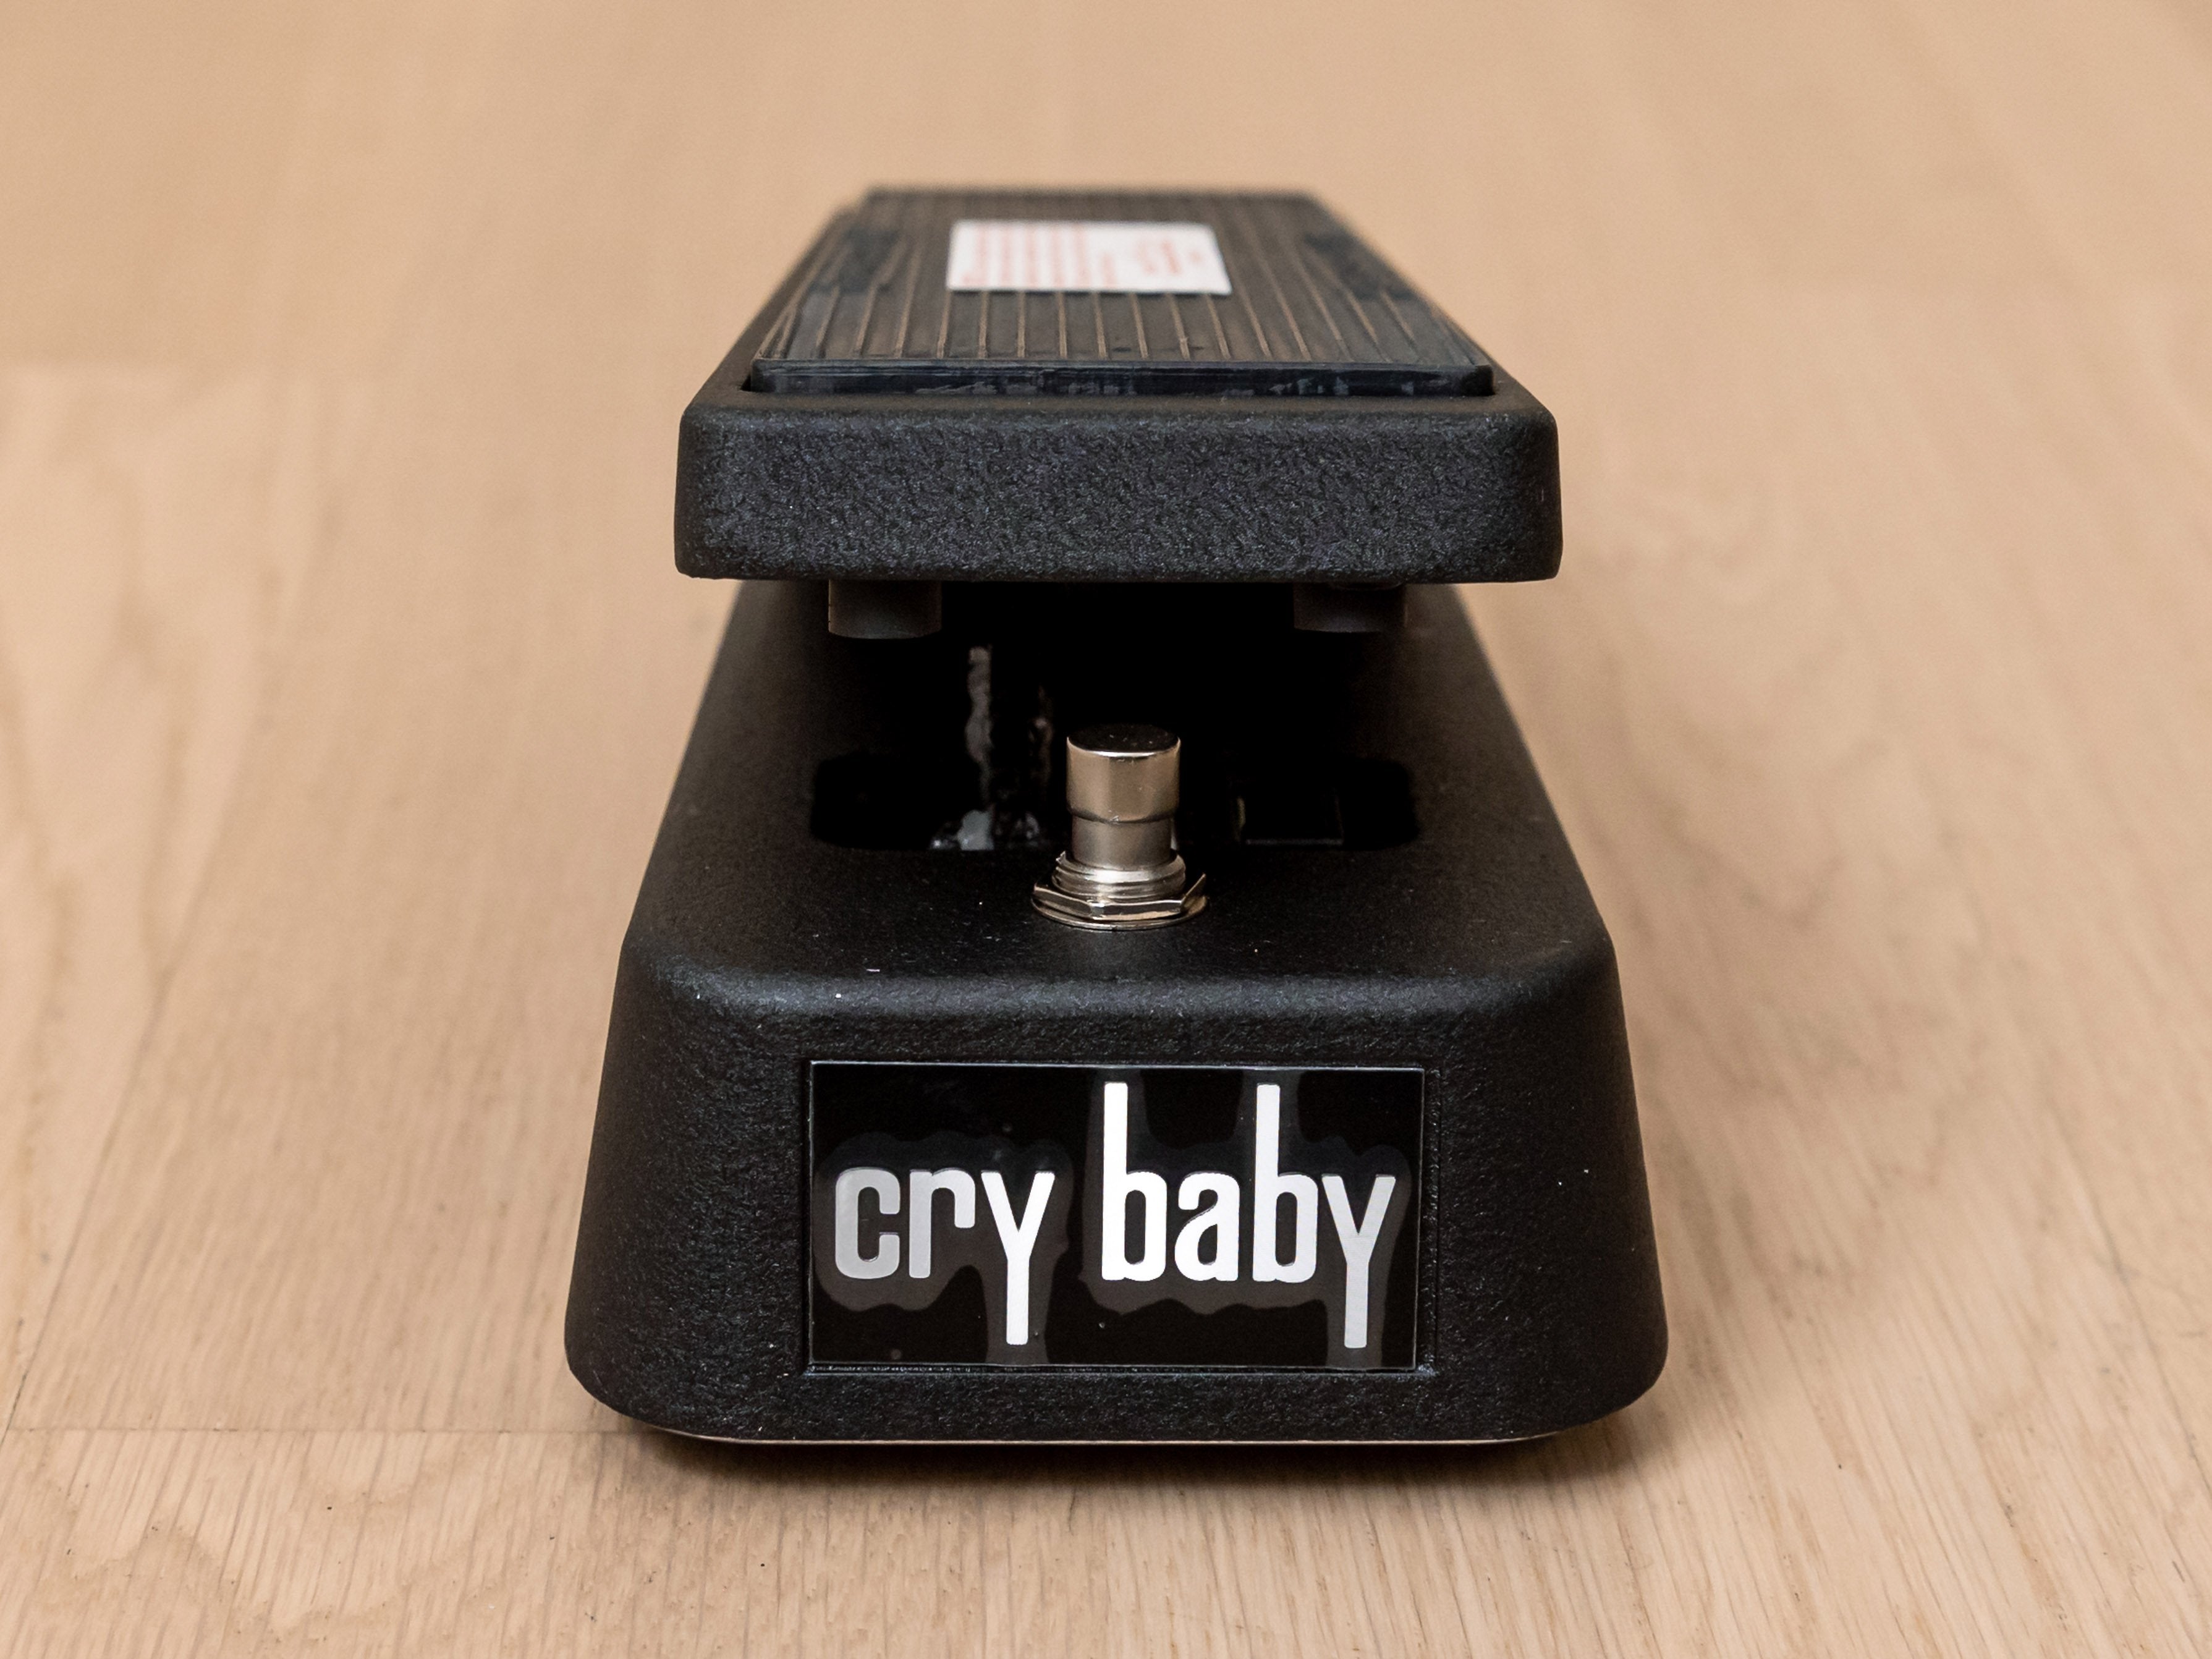 Dunlop Crybaby Model GCB-95 Wah Guitar Effects Pedal, Mint w/ Box